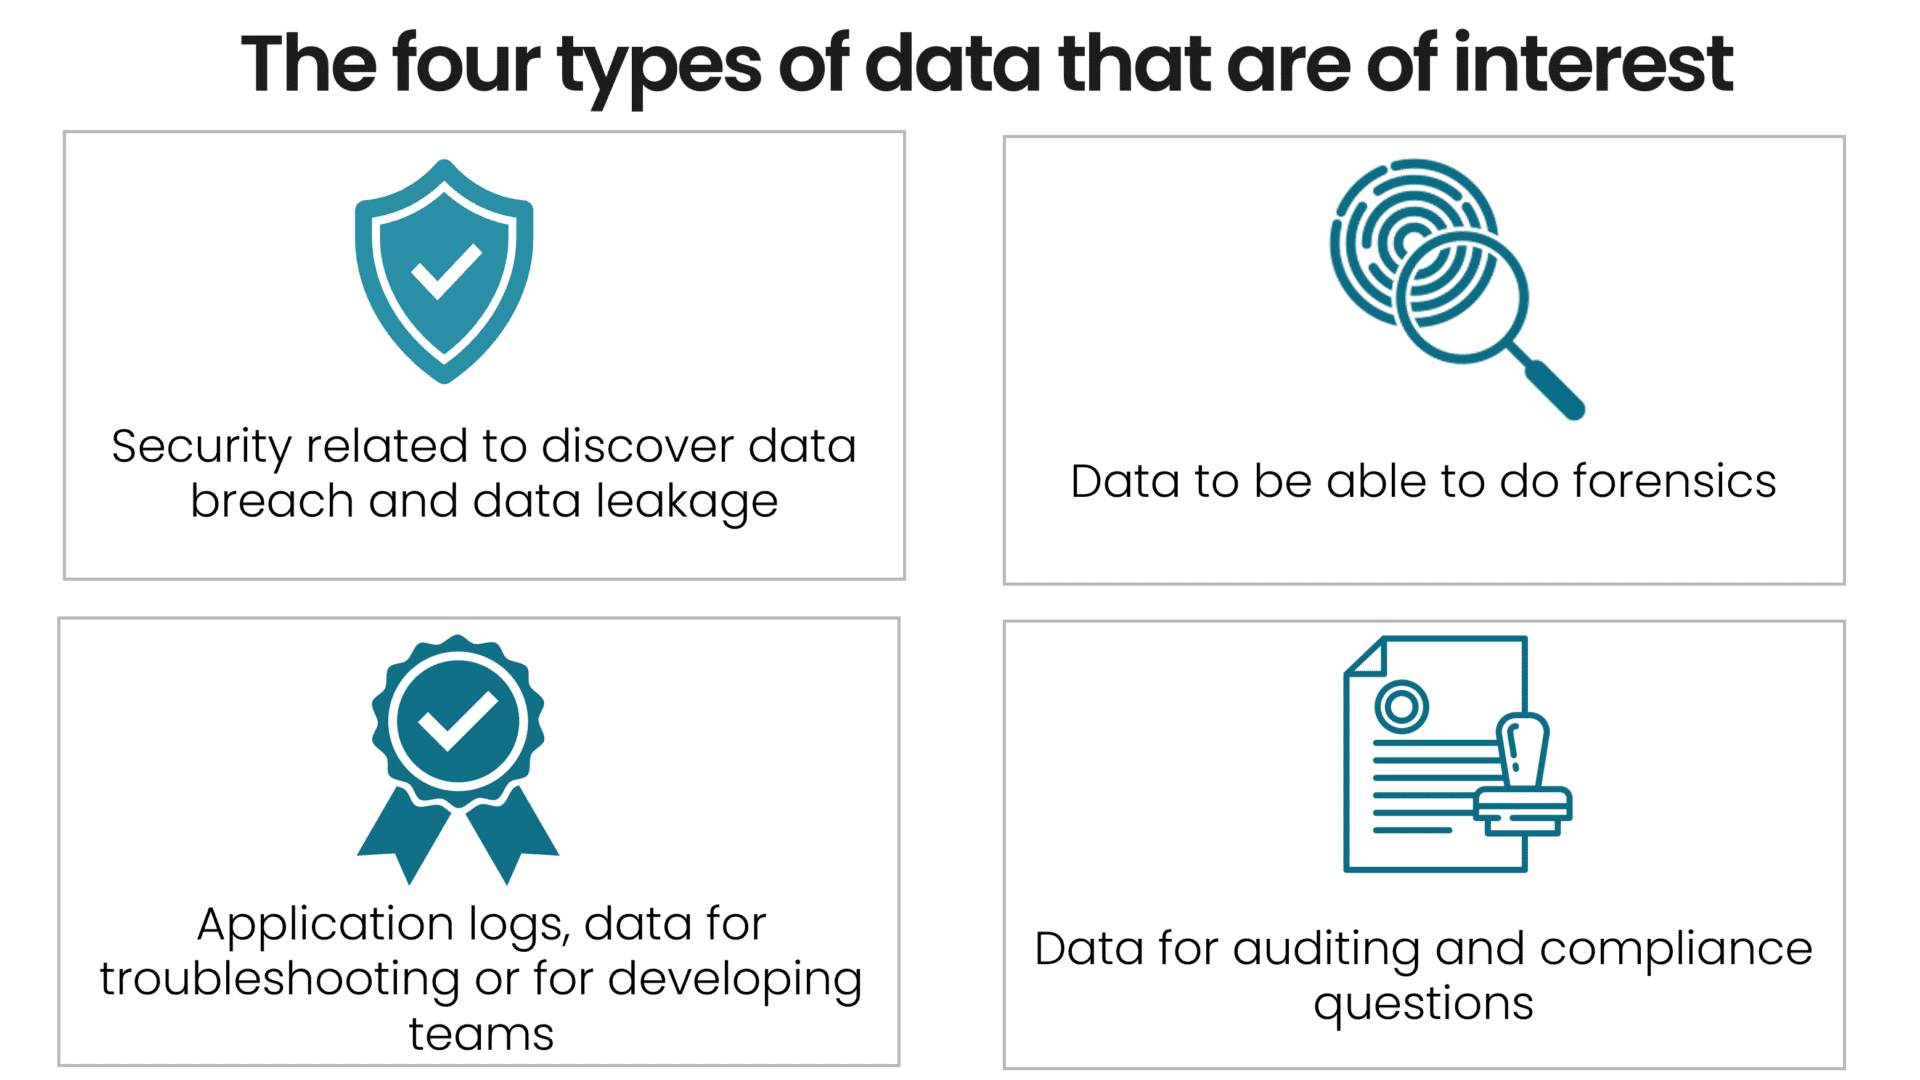 Image showing the four types of data in log detection. (1) Data used to discover breach and leakage. (2) data to do forensics. (3) logs and data for troubleshooting or development teams. (4) data for auditing and compliance reporting. 